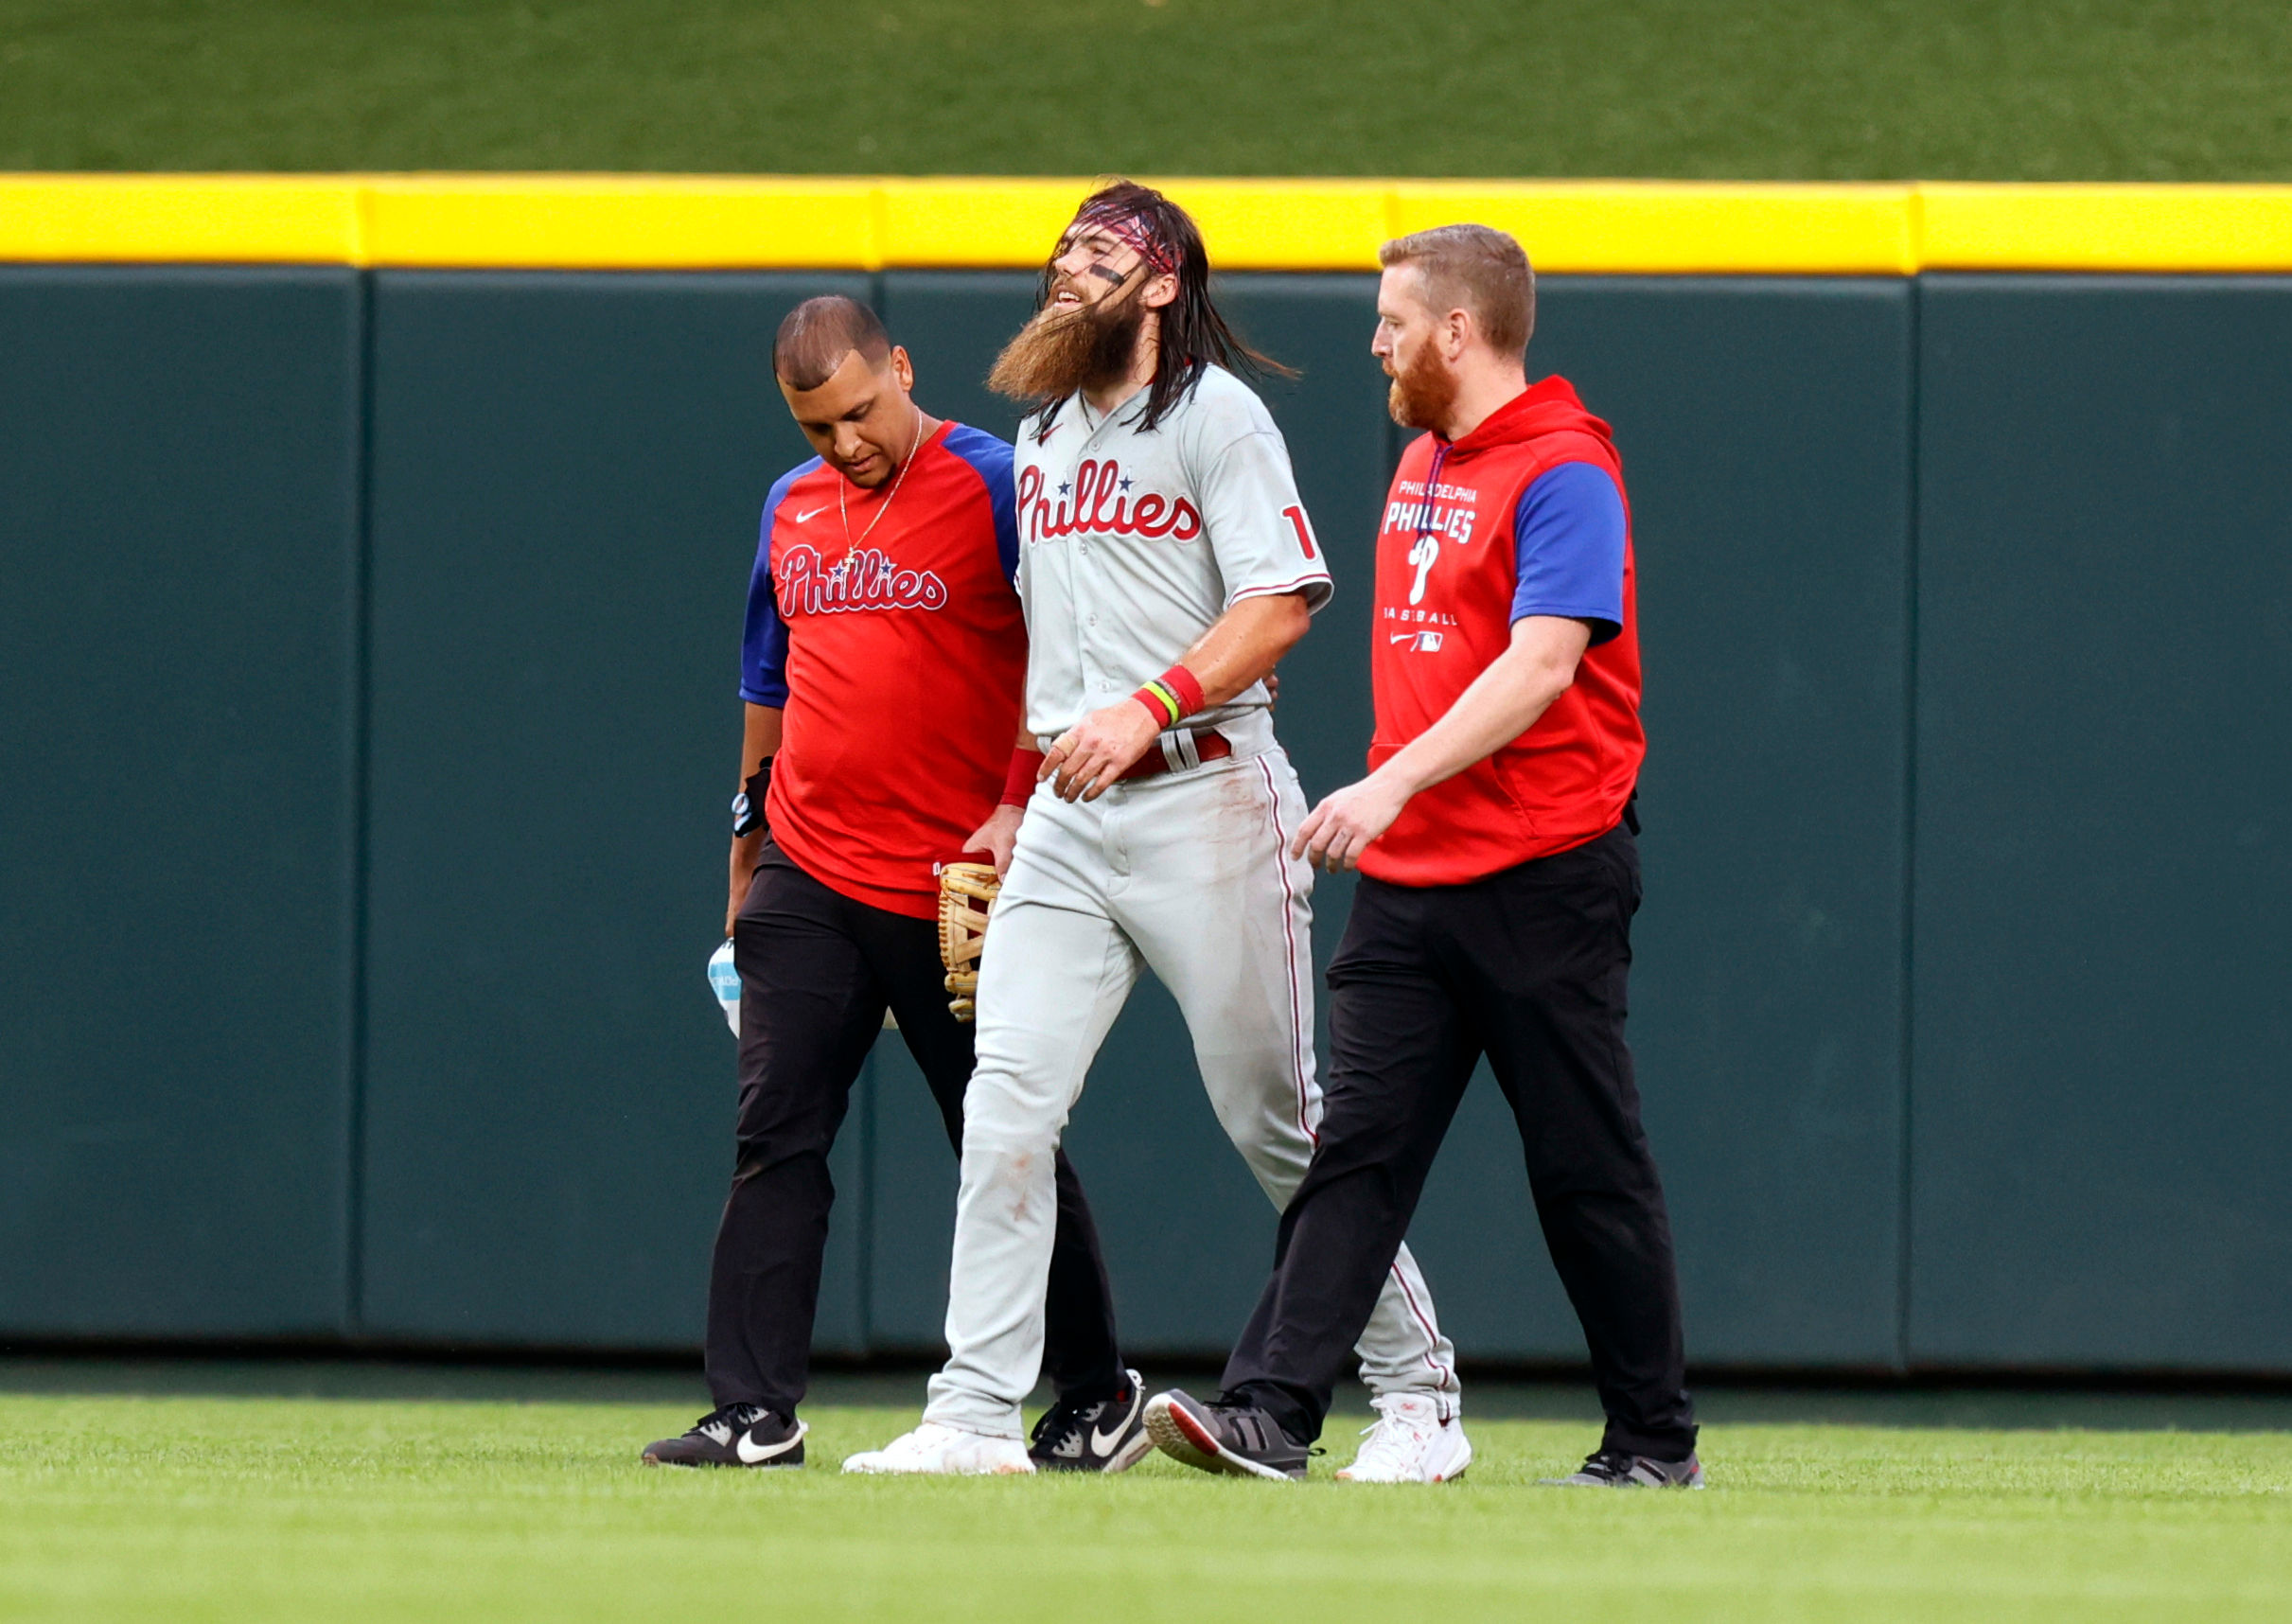 With Brandon Marsh injured, what are Philadelphia Phillies’ outfield options